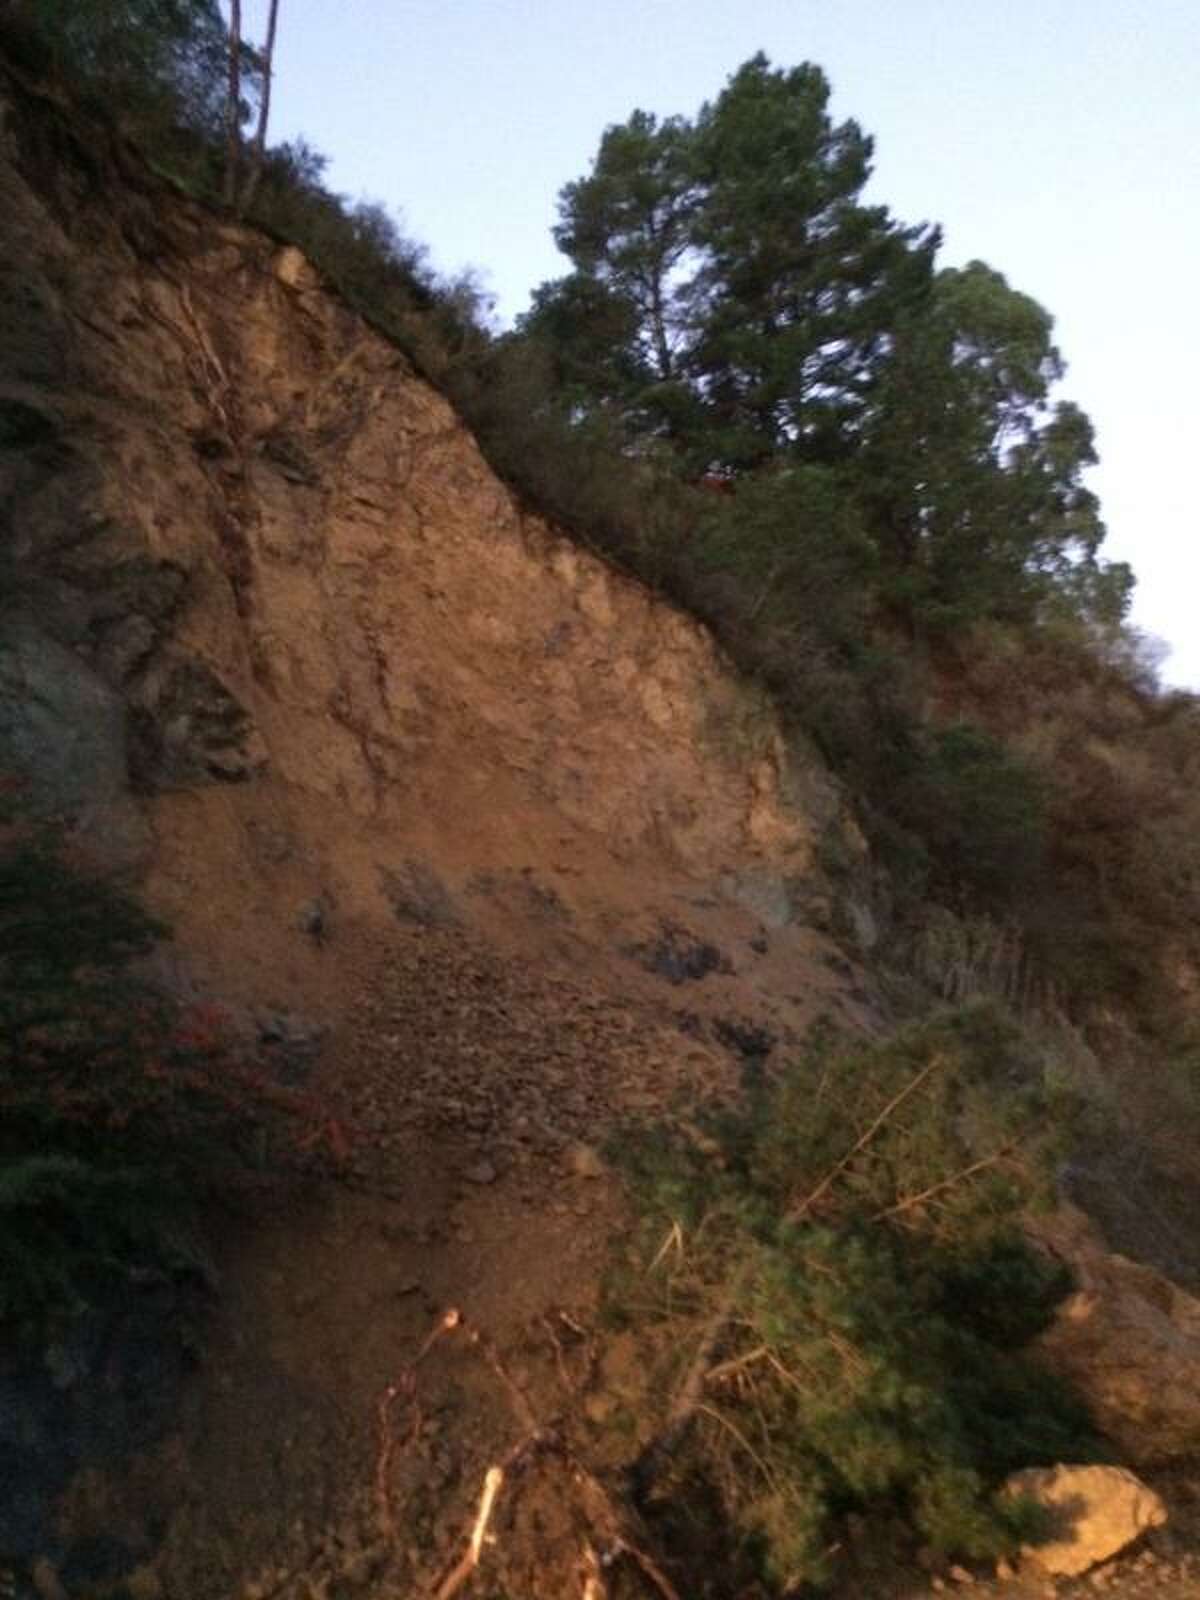 A hillside gave way in Sausalito early Monday morning spilling earth, rocks and mud across two southbound lanes of Highway 101.